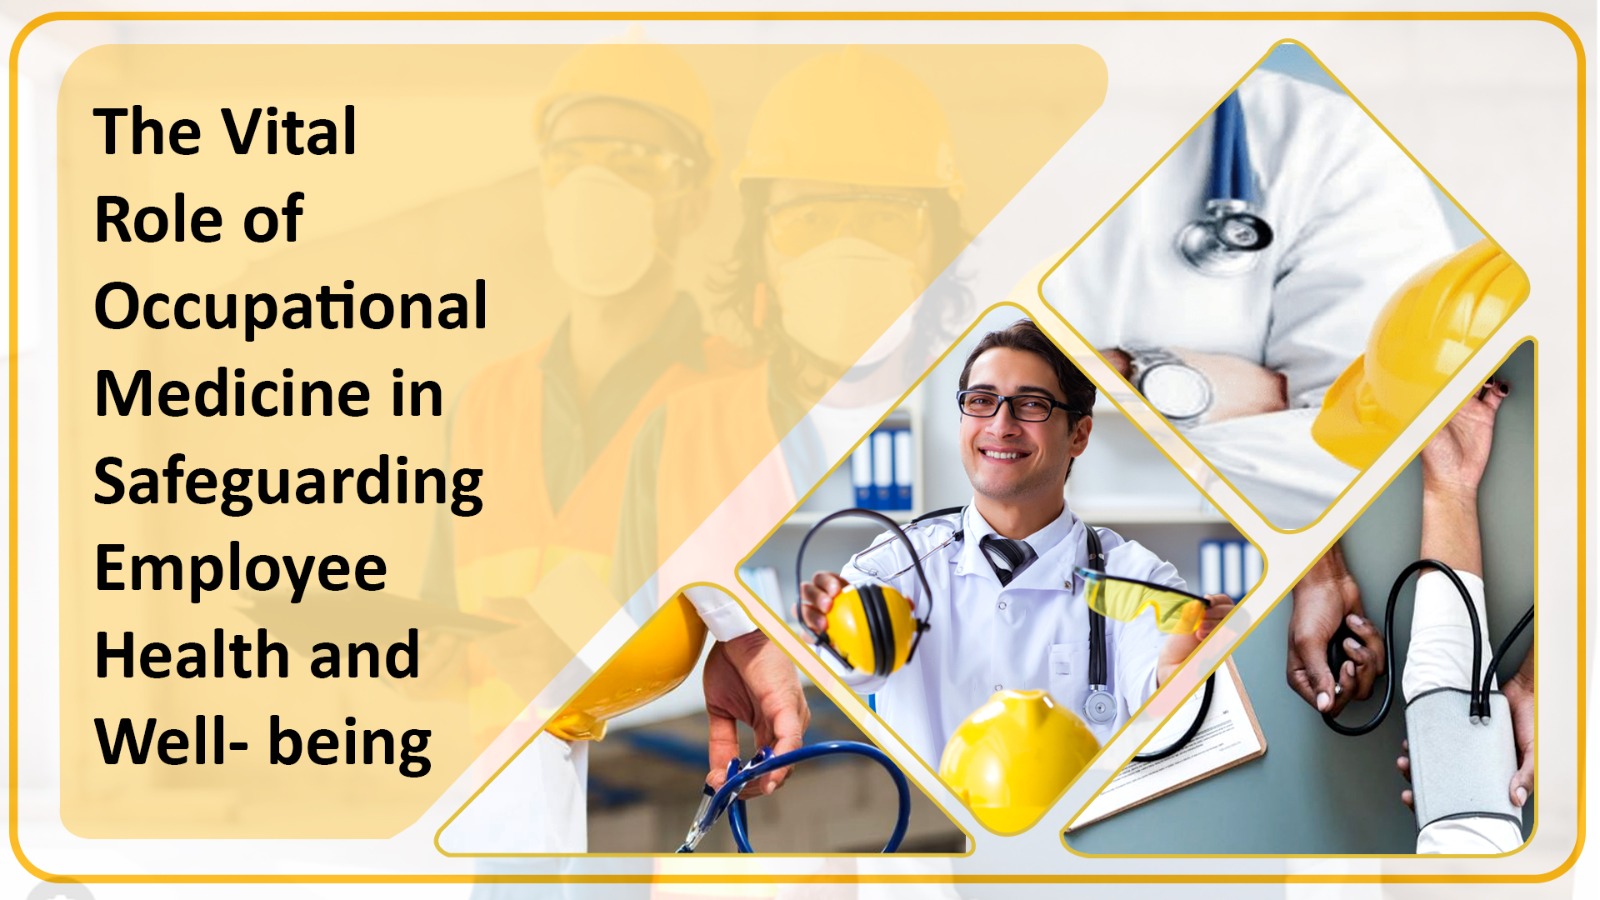 The Vital Role of Occupational Medicine in Safeguarding Employee Health and Well-being